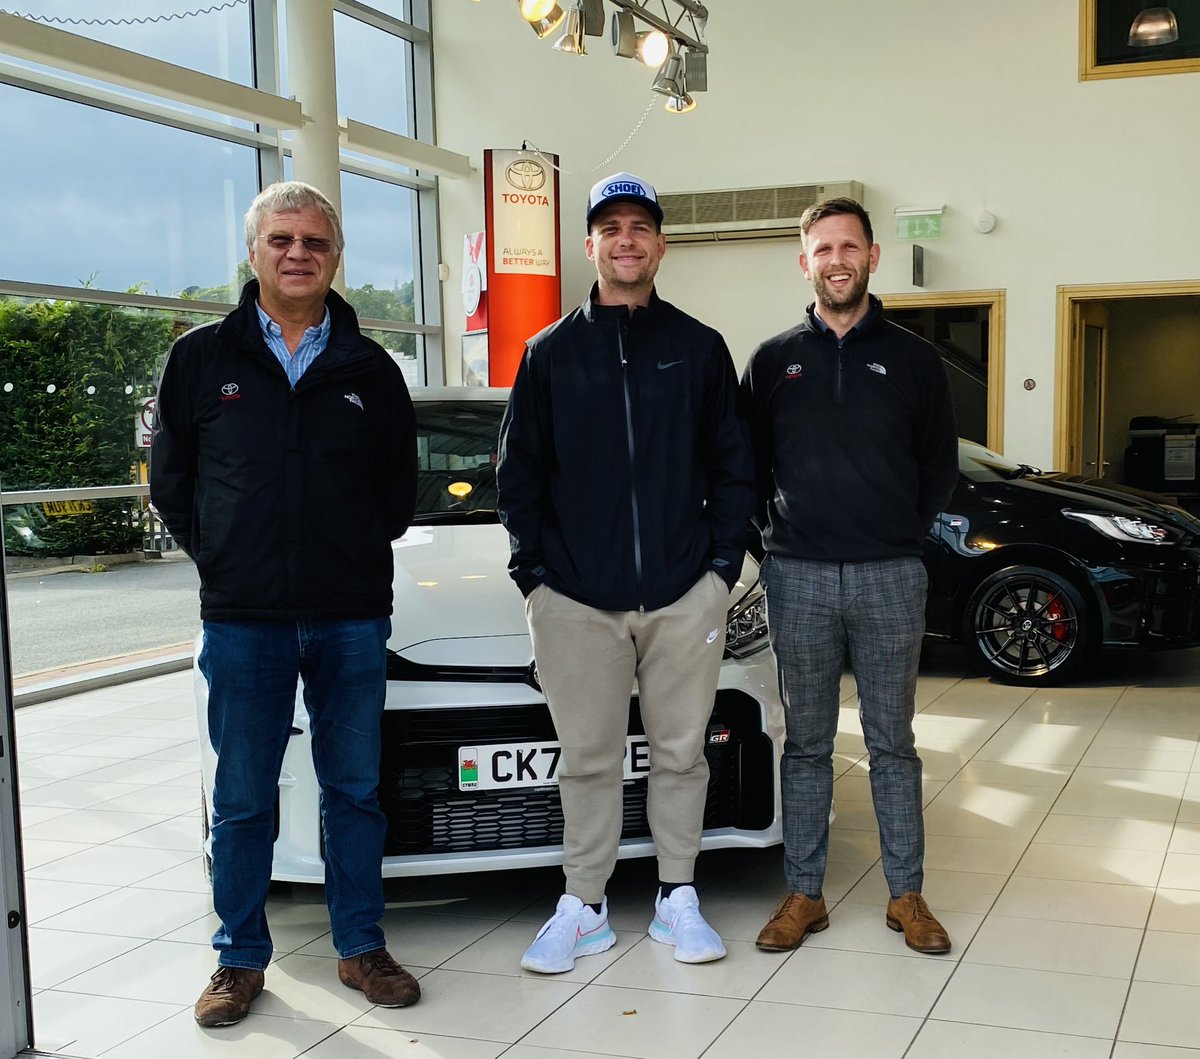 Welsh International rugby star @ScottWilliams_1 and proprietor of @SWMotor_sport has collected his new GR Yaris from us today. Thank you very much Scott we hope you enjoy your drive home.